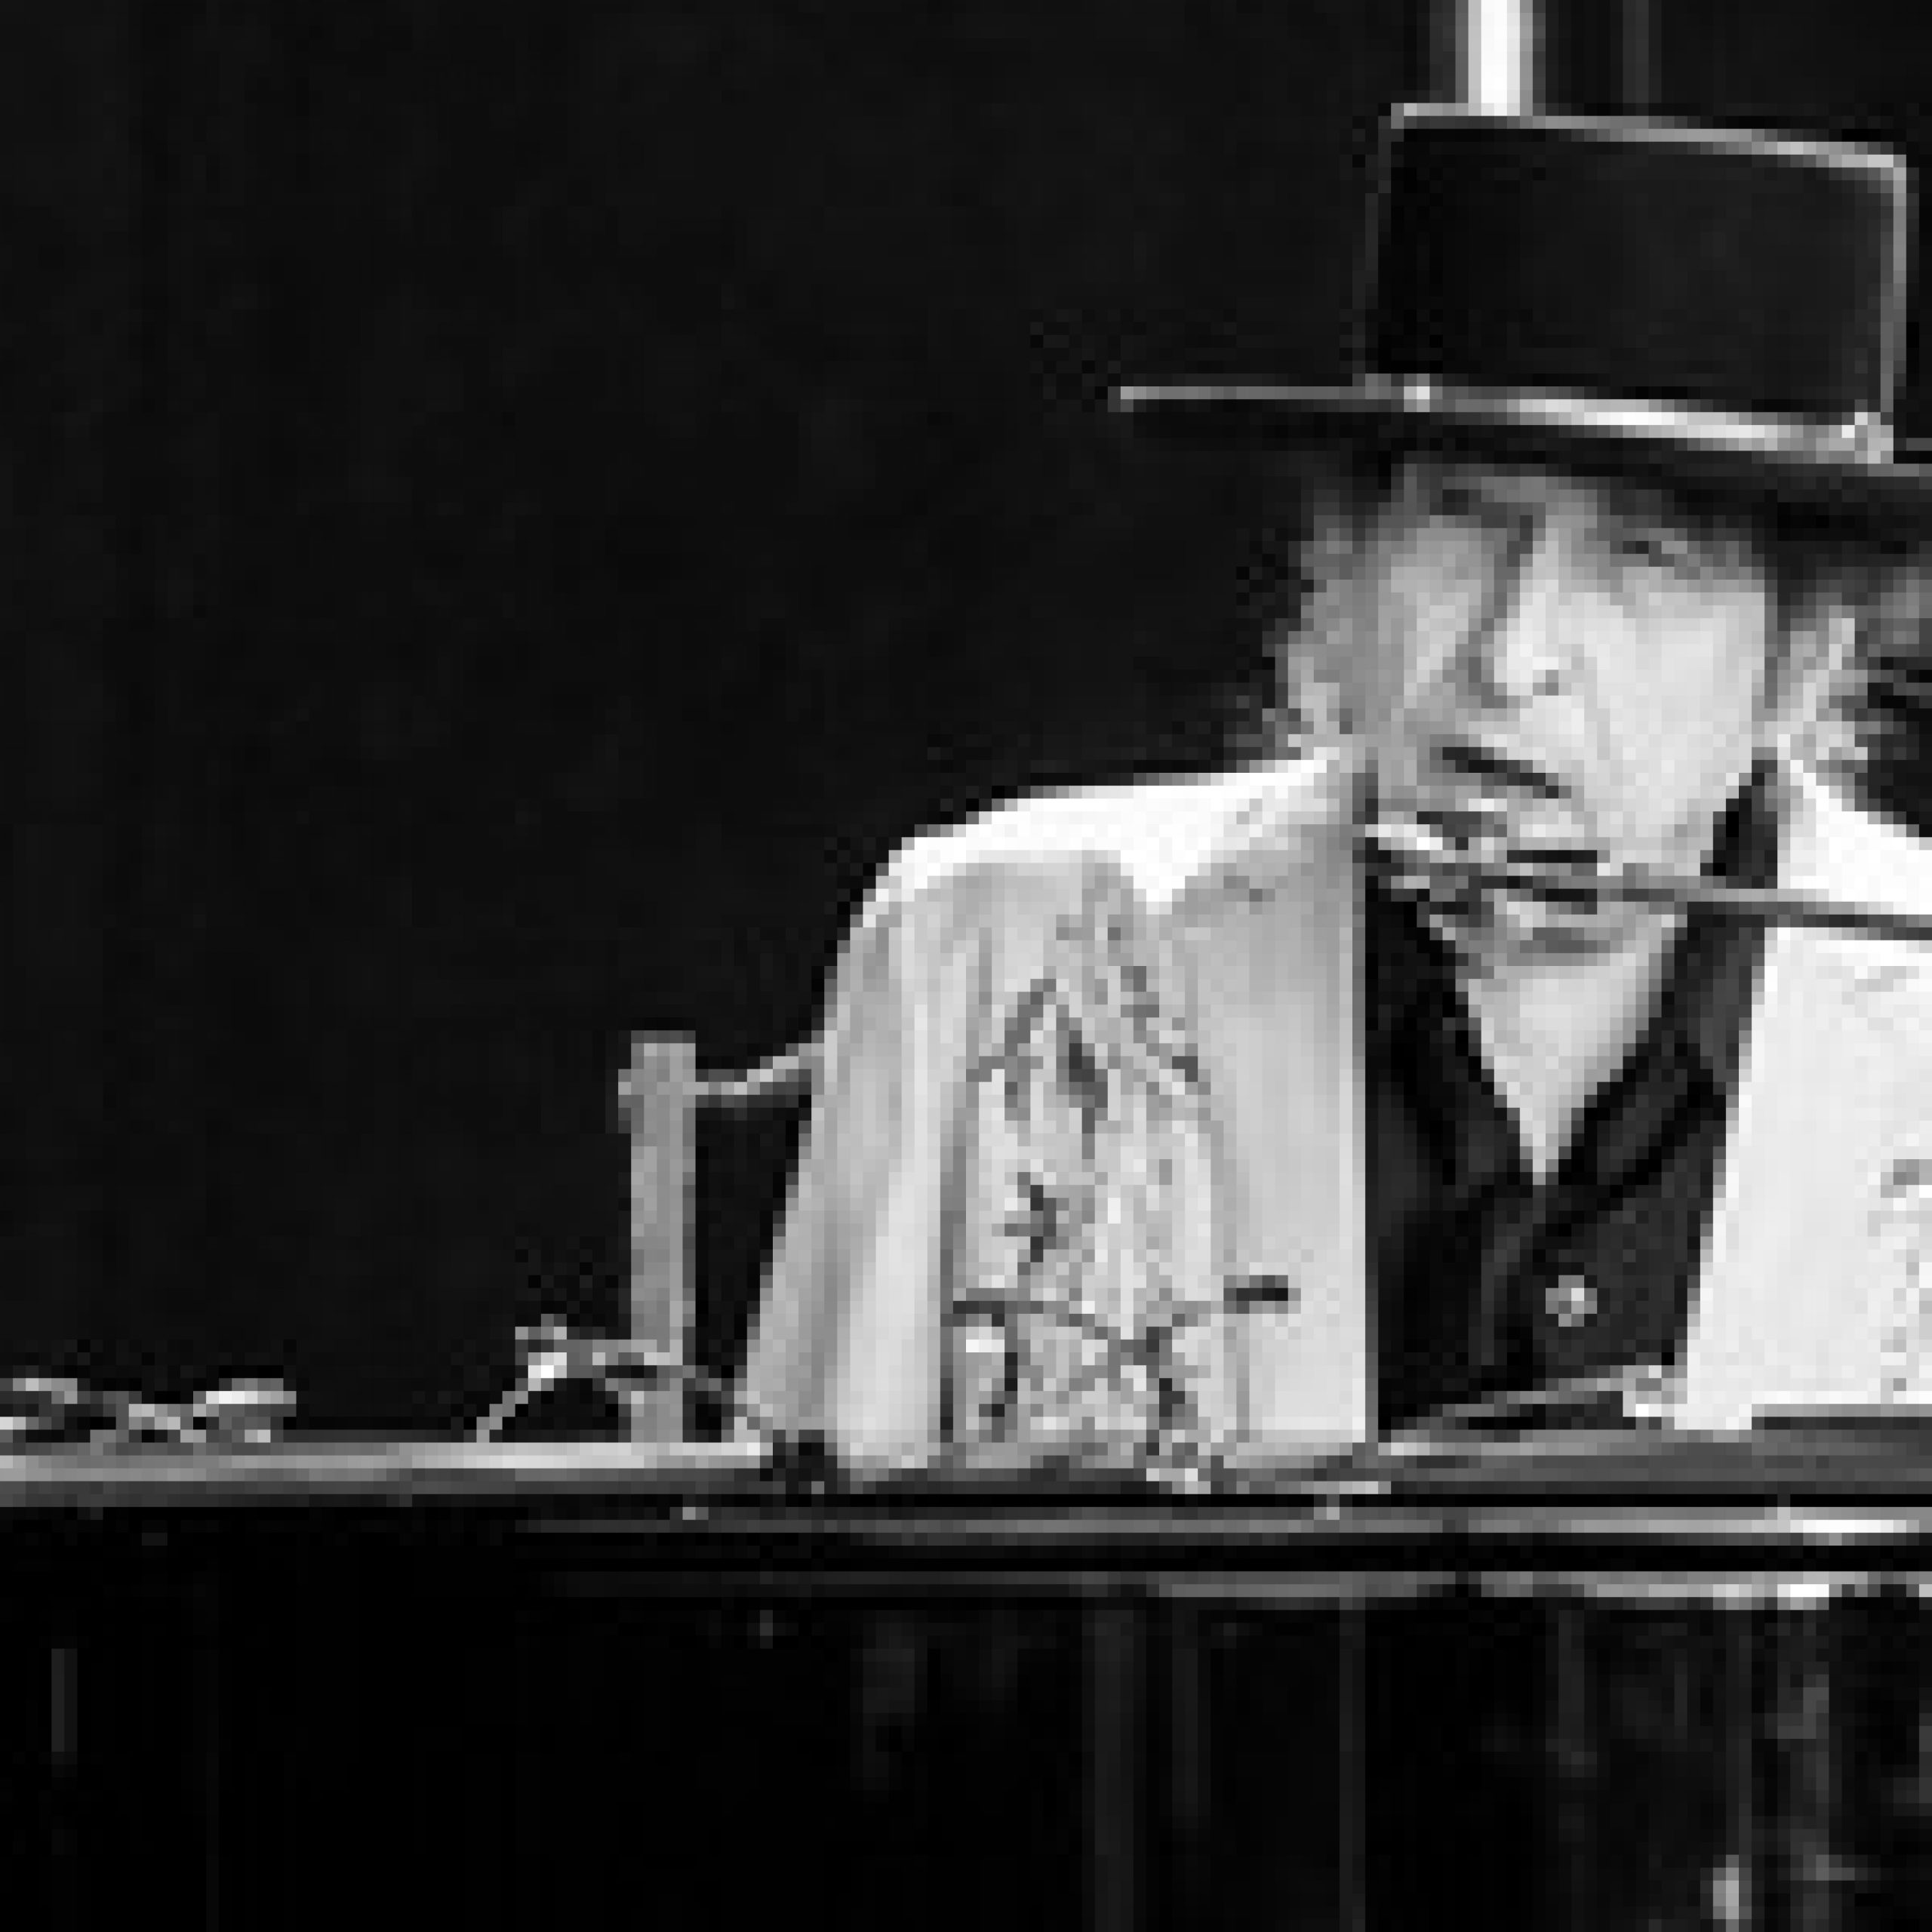 Bob Dylan Film ‘Odd and Ends’ Sets Digital Release From Sony Music Entertainment